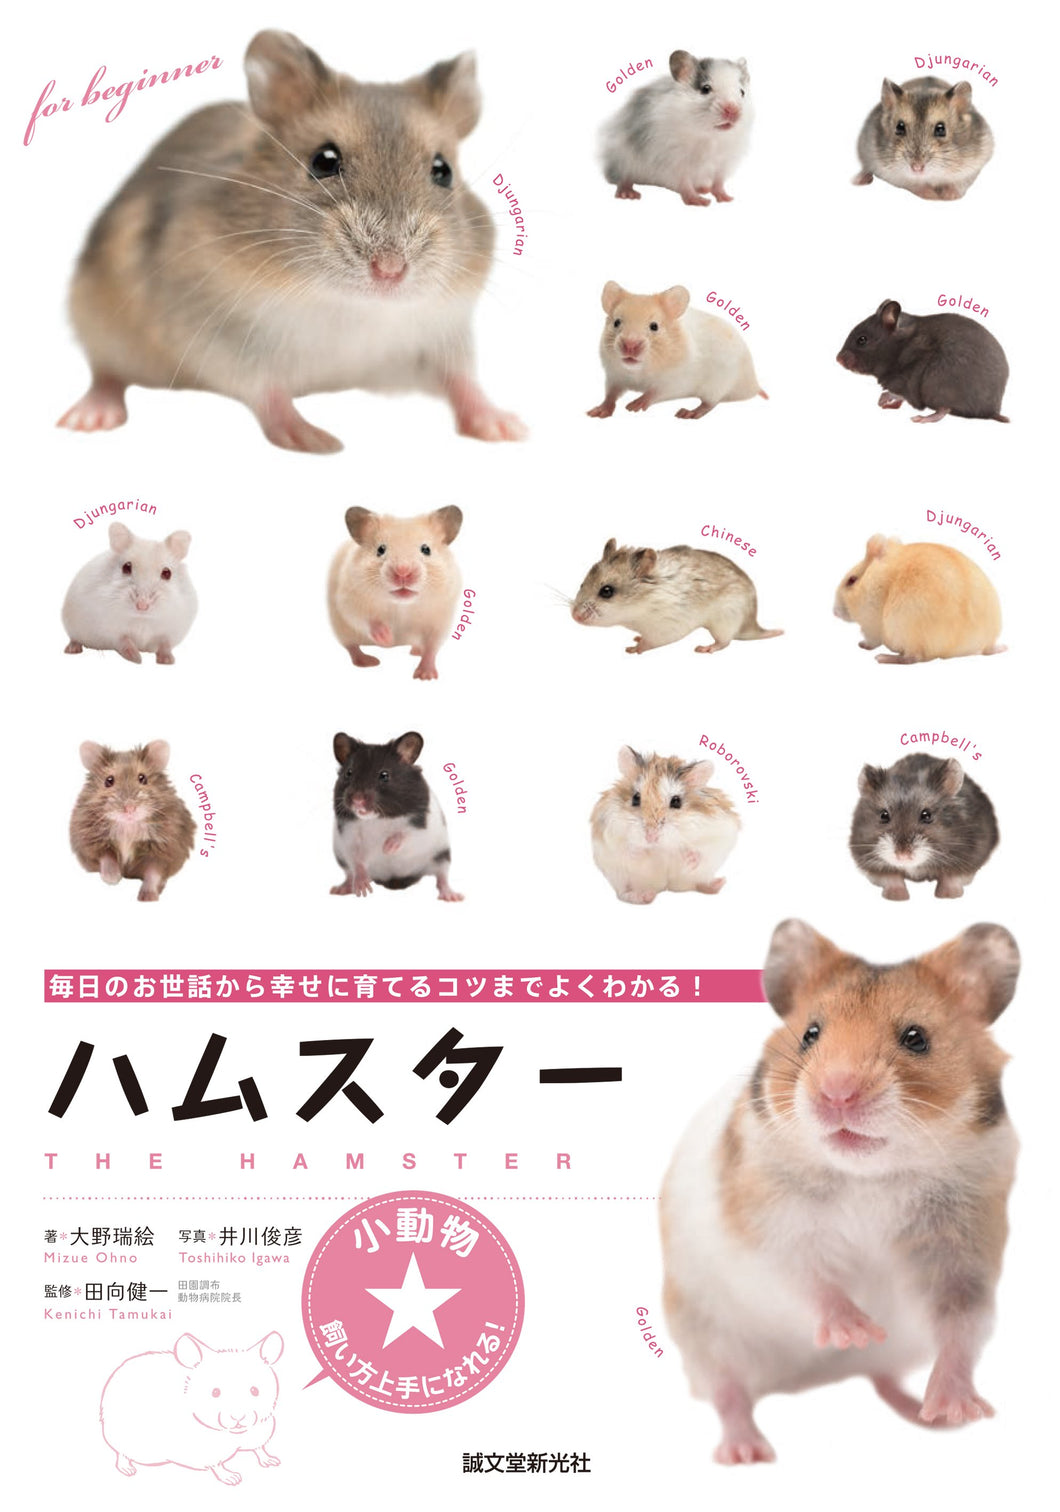 Small animals ☆ You can become good at keeping them! hamster